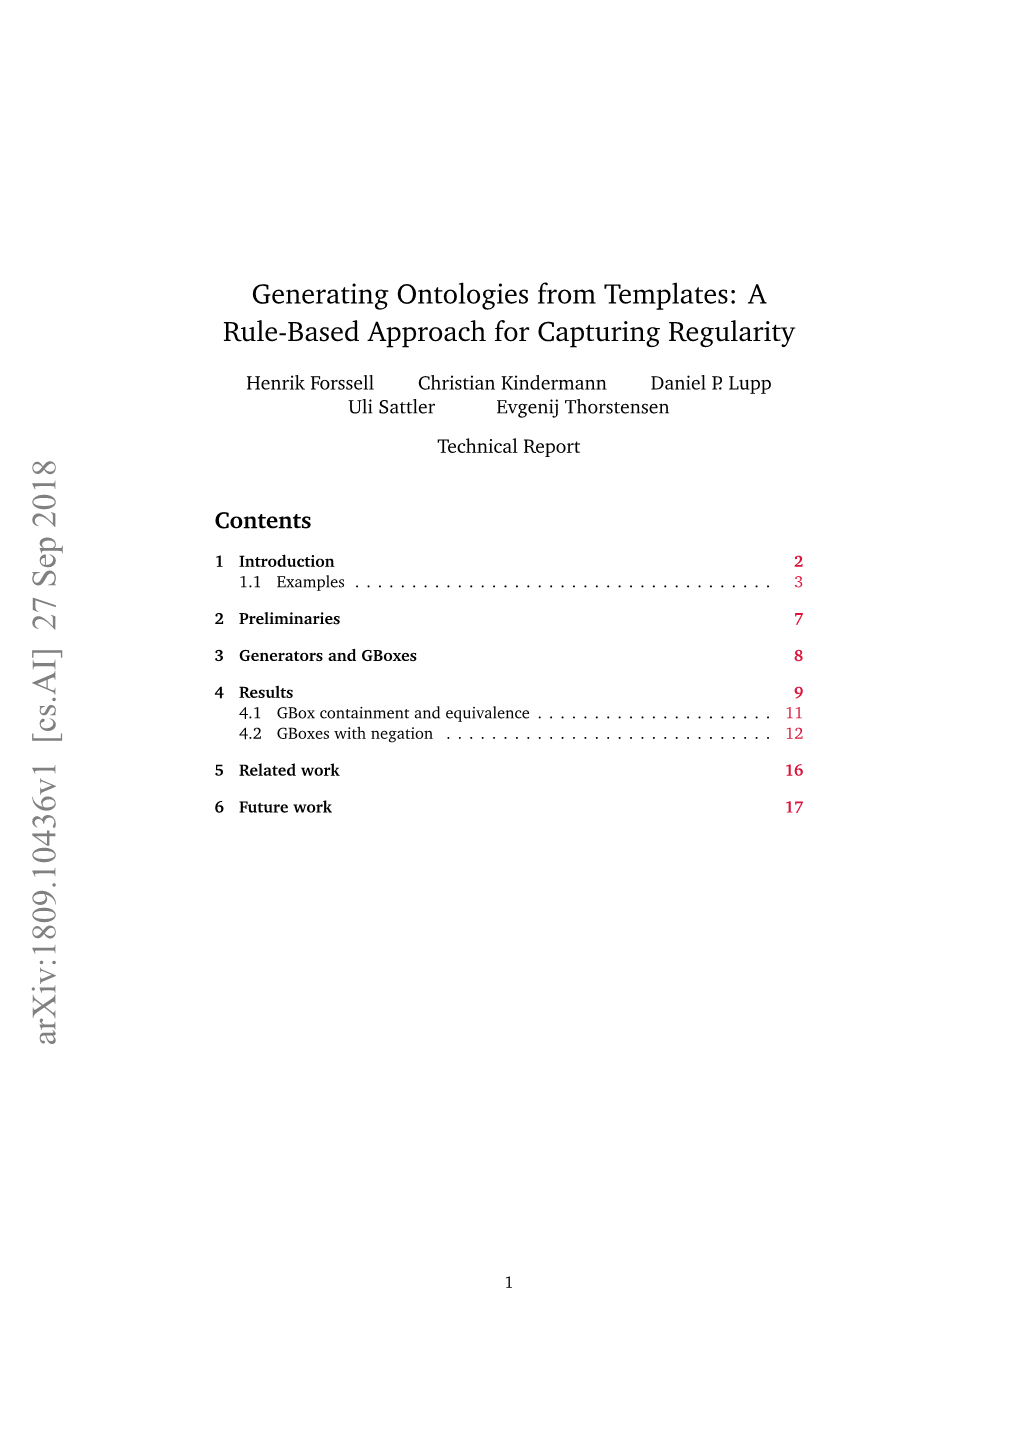 Generating Ontologies from Templates: a Rule-Based Approach for Capturing Regularity